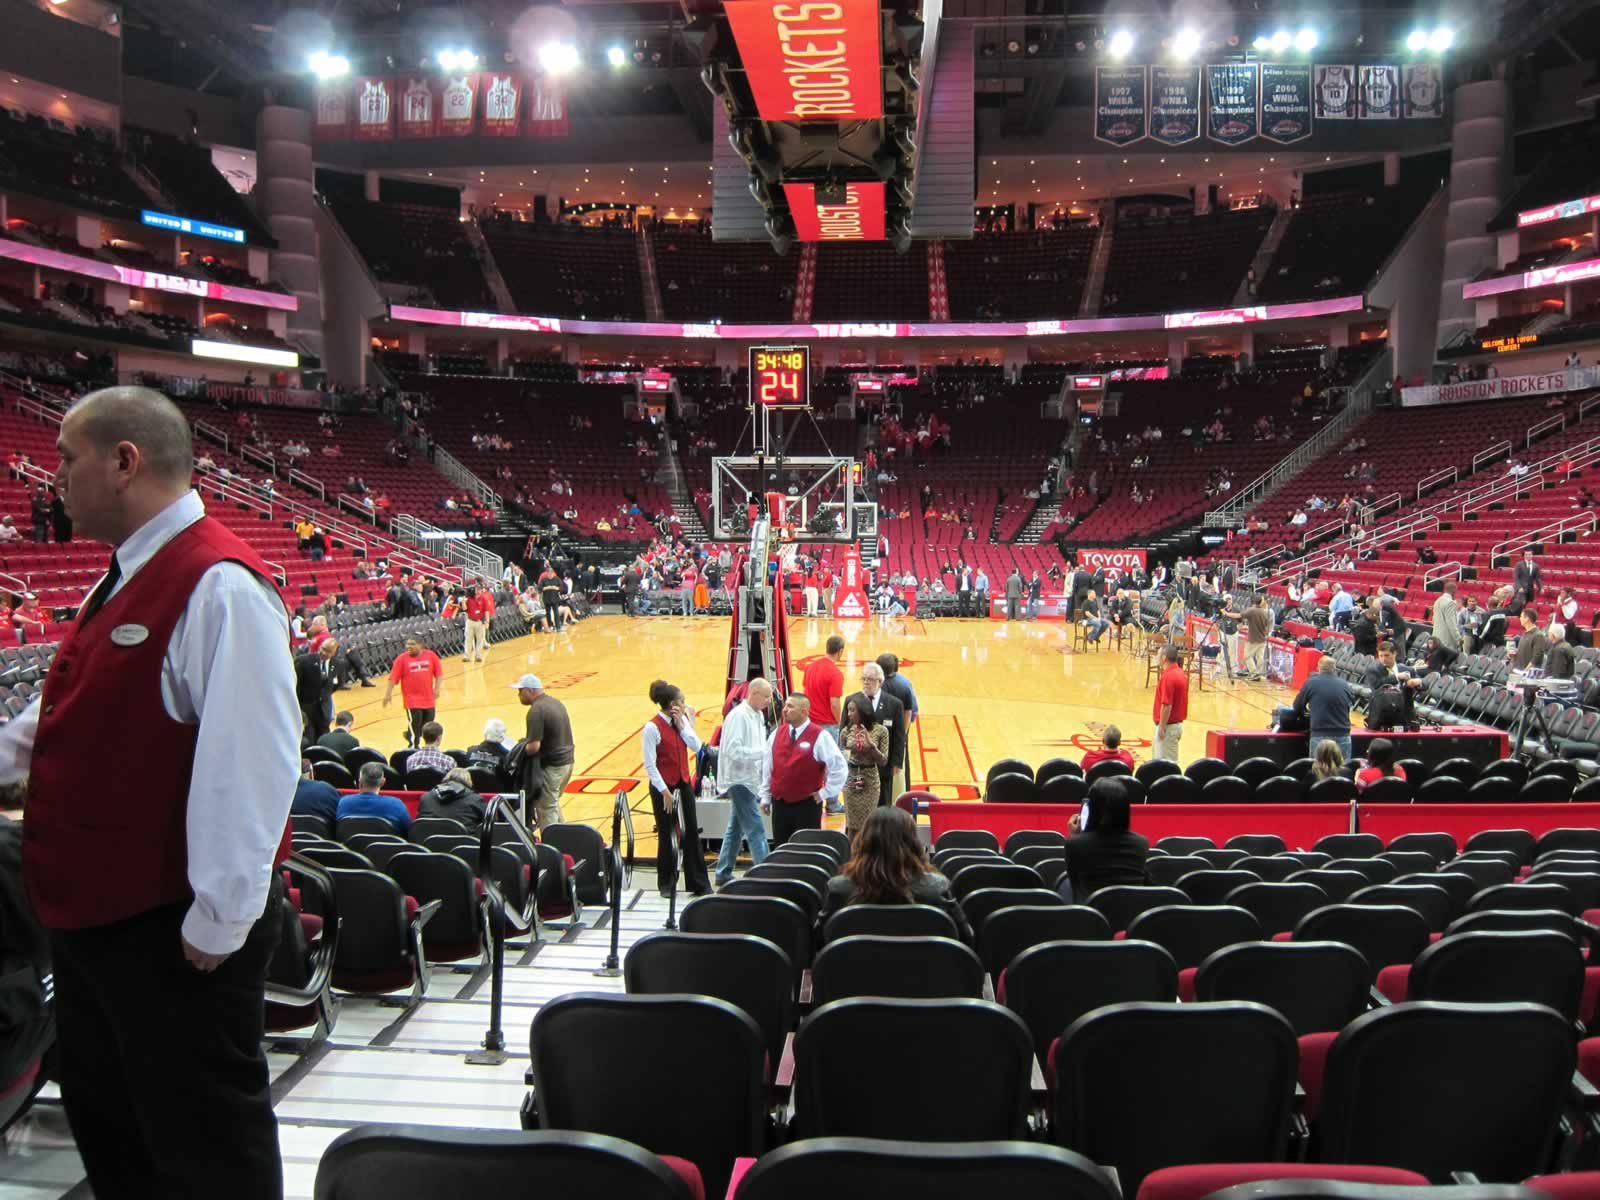 Difficult to see much from this close behind the basket: Toyota Center Section 126 ...1600 x 1200